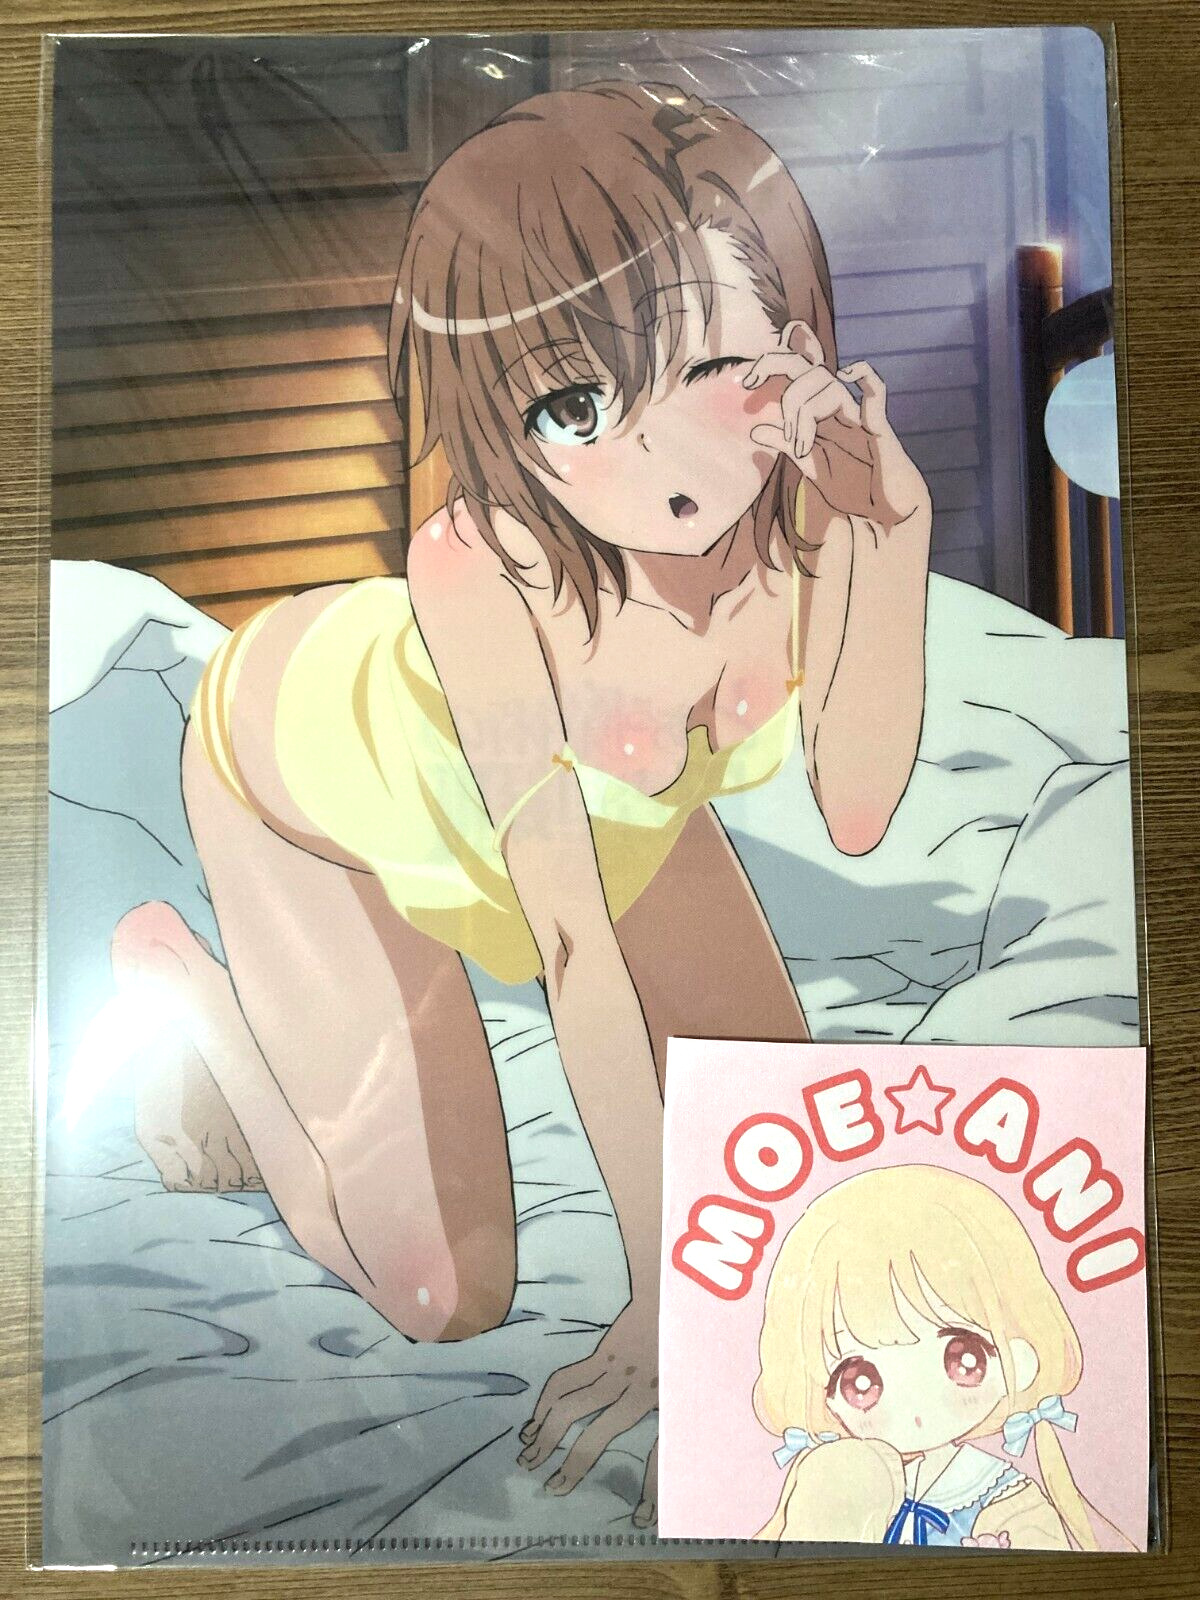 A Certain Magical Index 3 Misaka Mikoto A4 Clear File Bedroom Underwear Anime